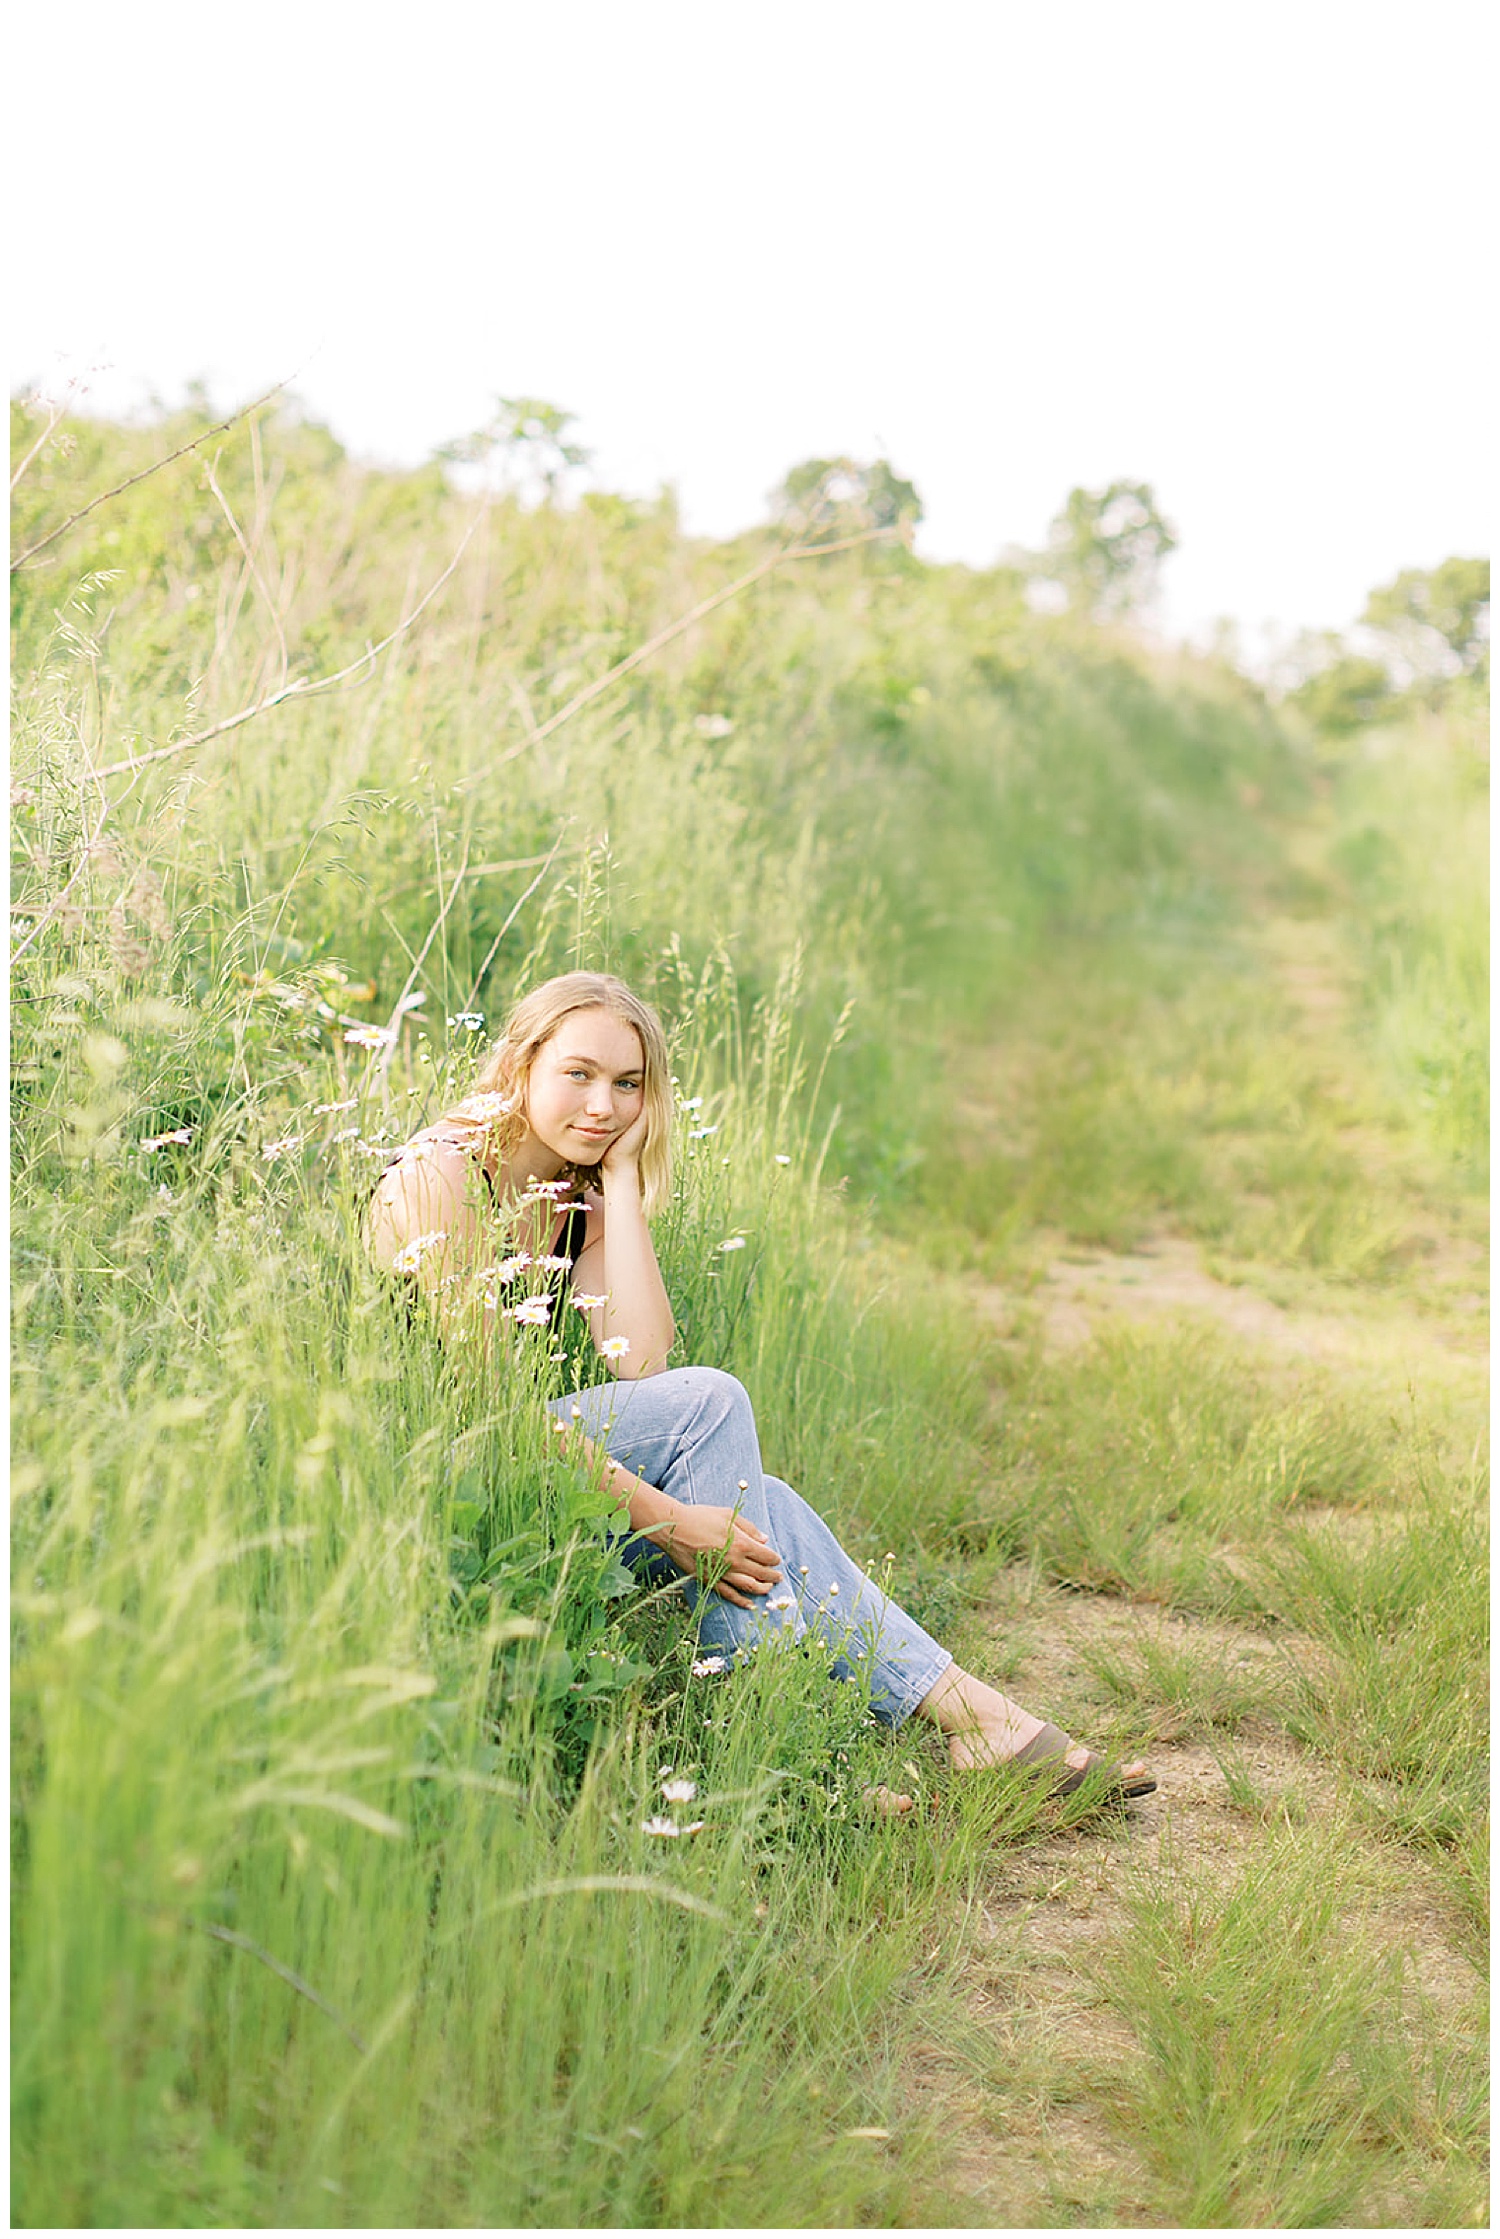 Seven Islands State Birding Park high school senior portrait session in the spring/summer. Image by Holly Michon Photography.